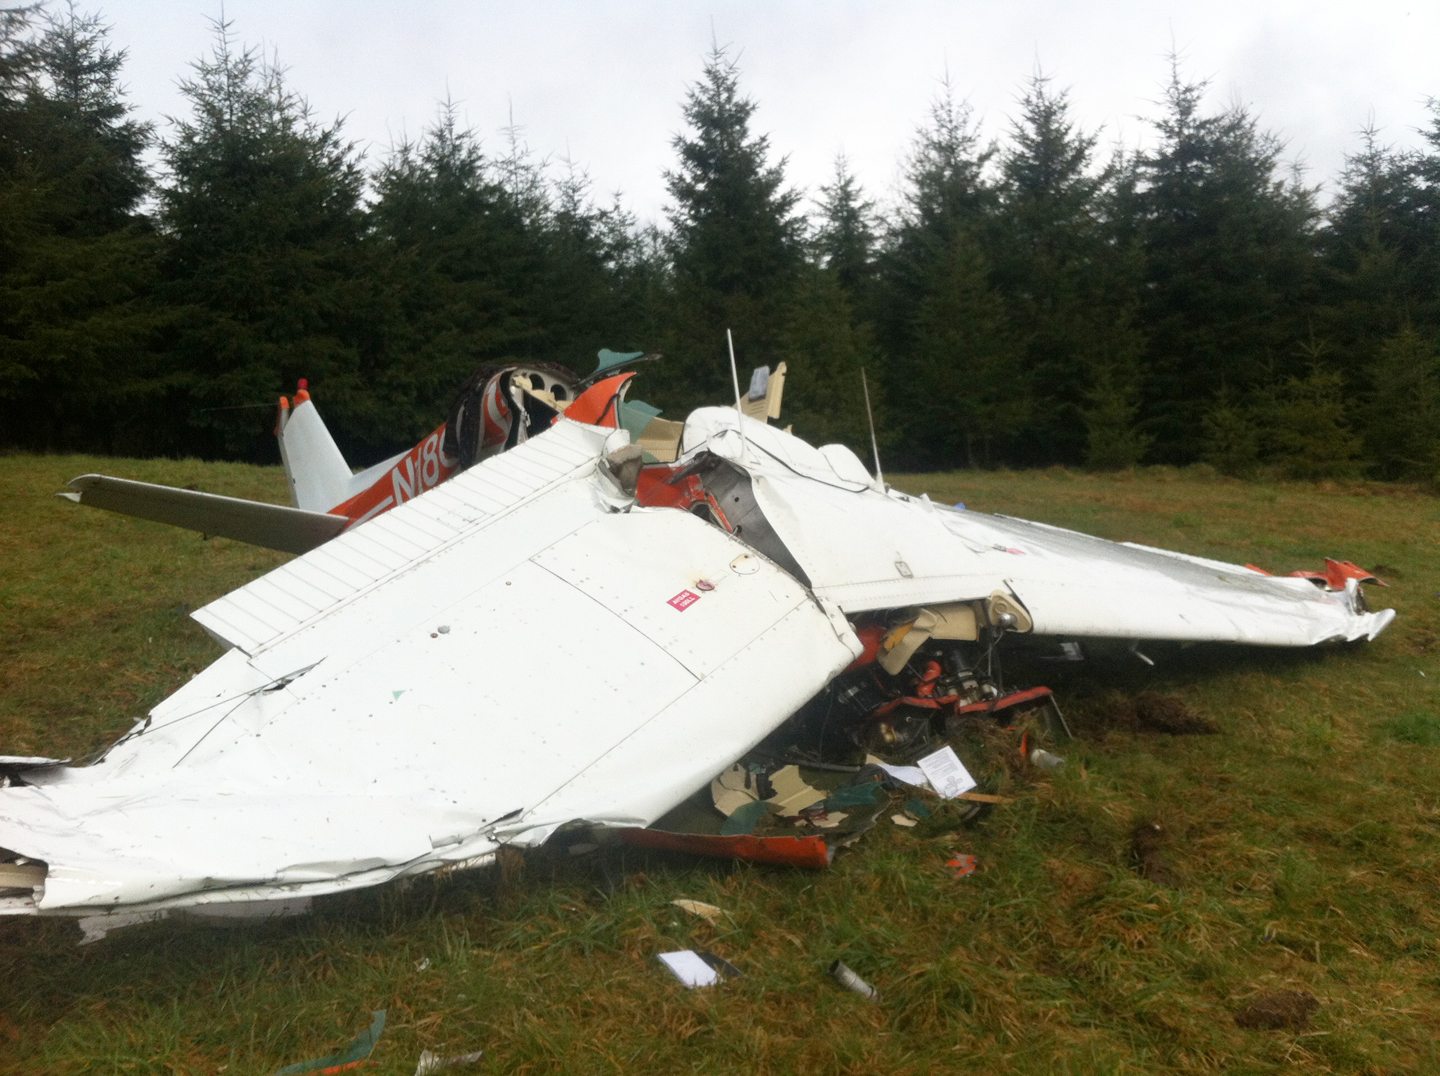 Columbia County Sheriff's Deputies recovered the bodies of a local flight instructor, Todd Norrish, 47, and his 17-year-old student pilot from the wreckage of a Cessna aircraft near Goble, Ore.